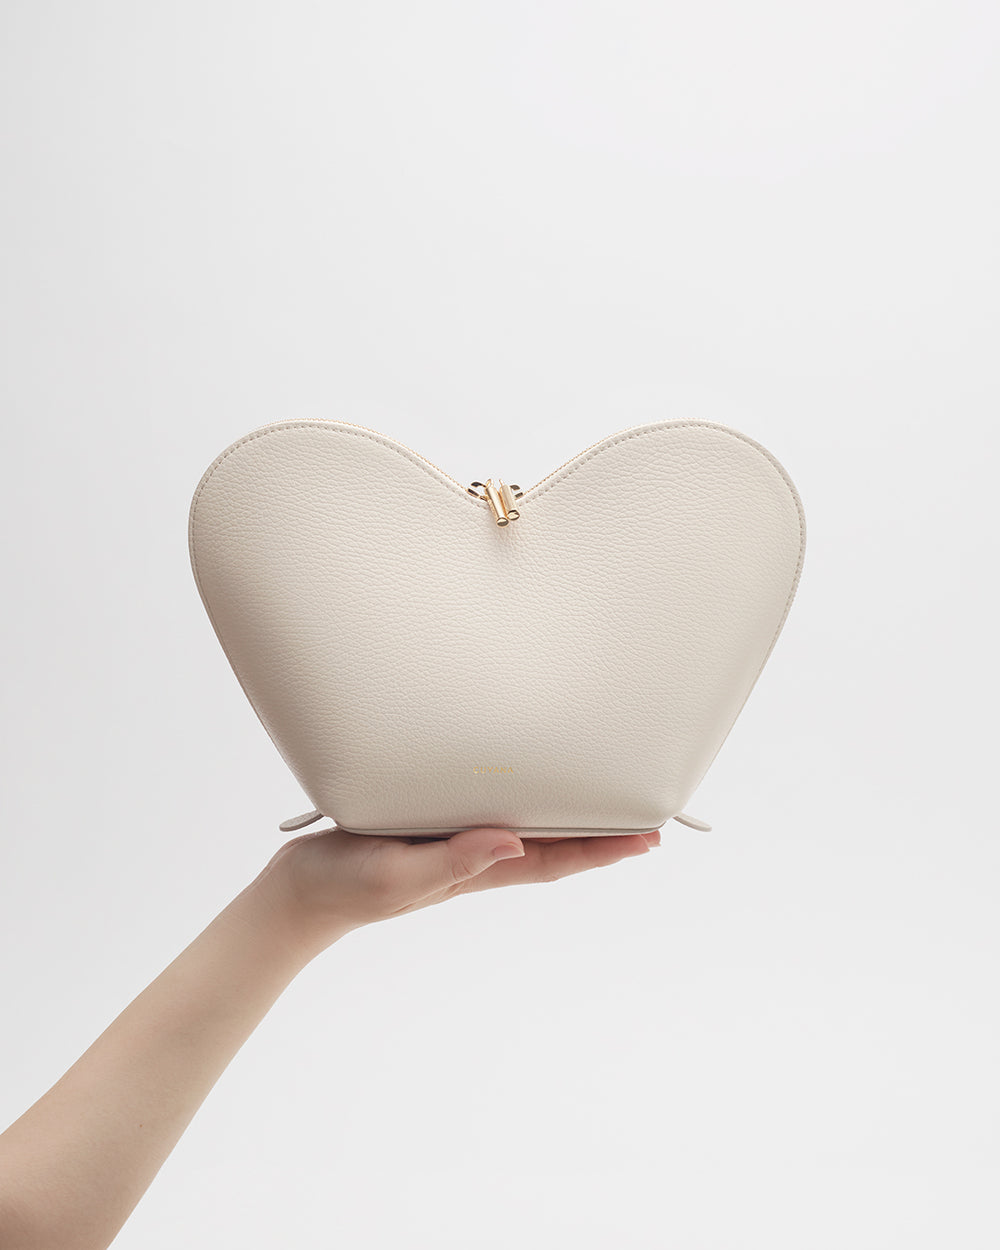 Hand holding a heart-shaped purse against a light background.